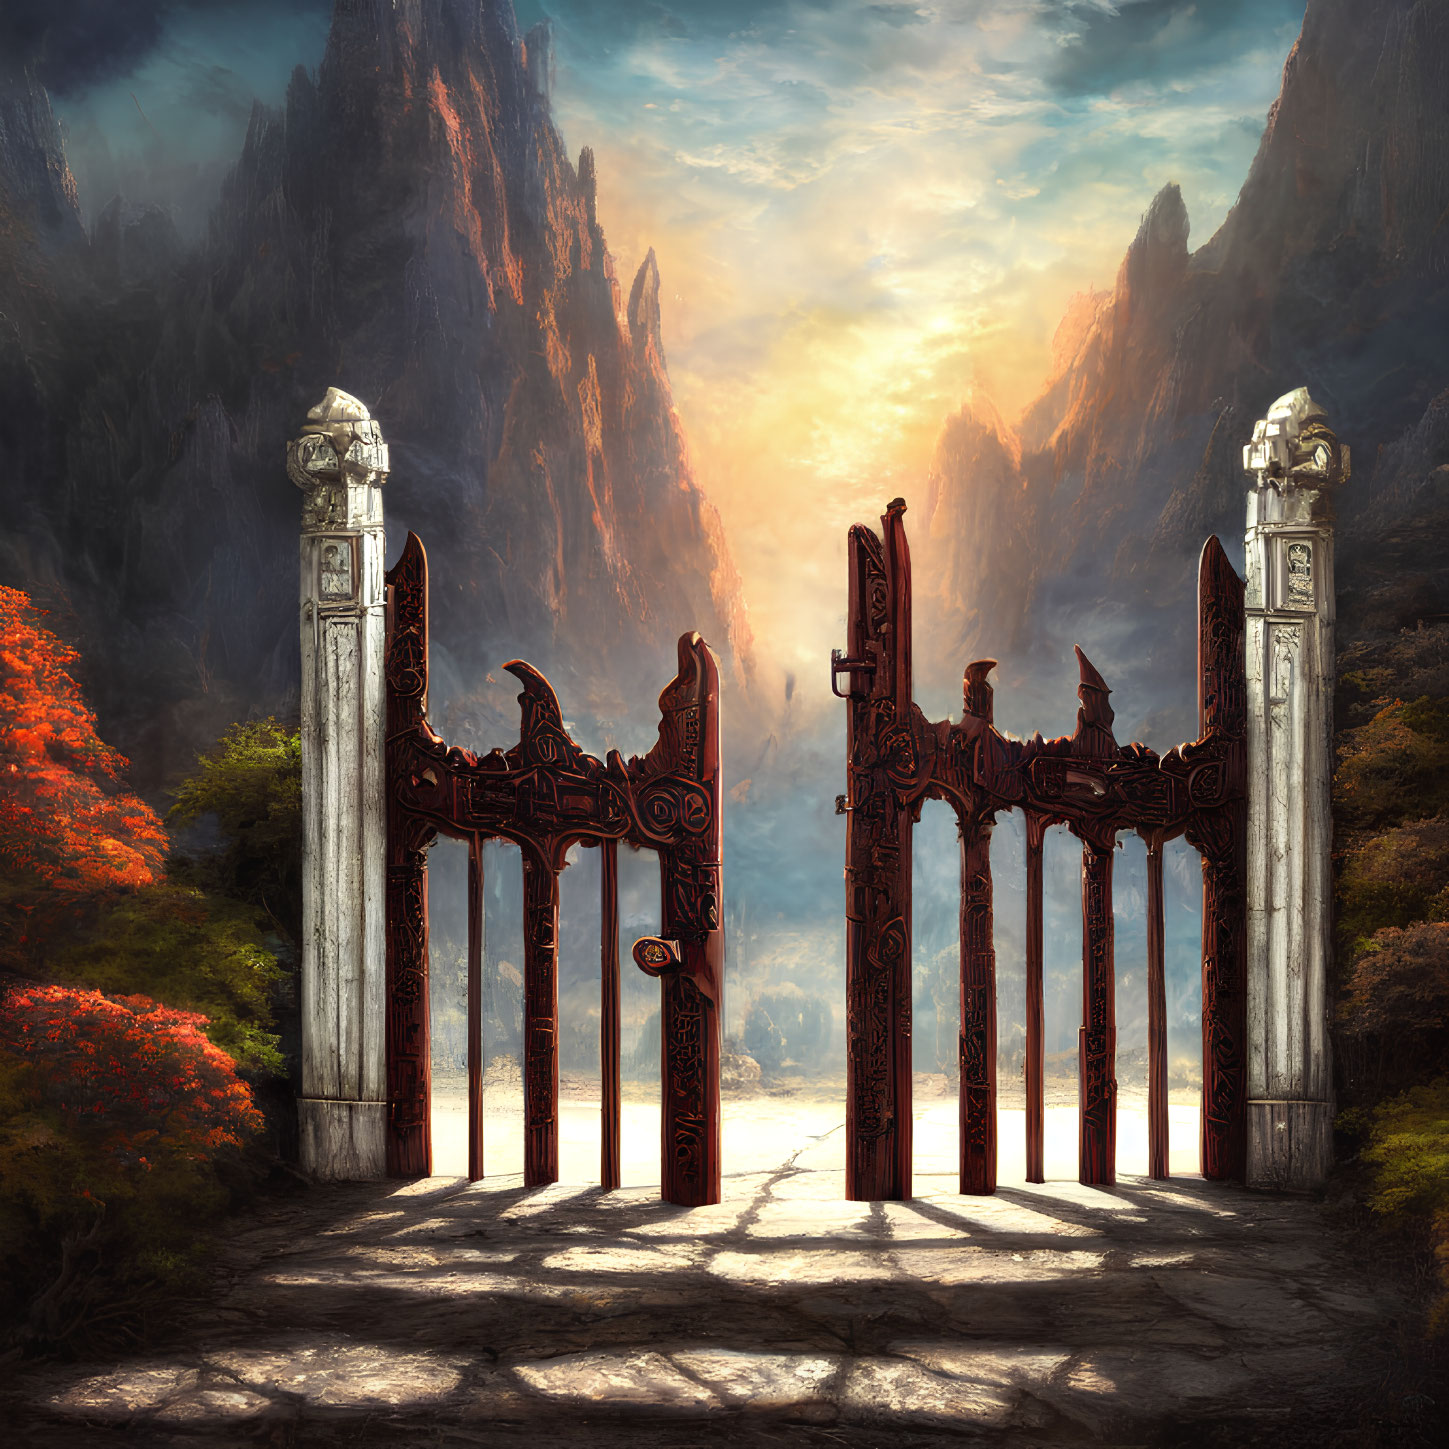 Intricate Carved Gate Surrounded by Cliffs, Sunrise, and Autumn Trees